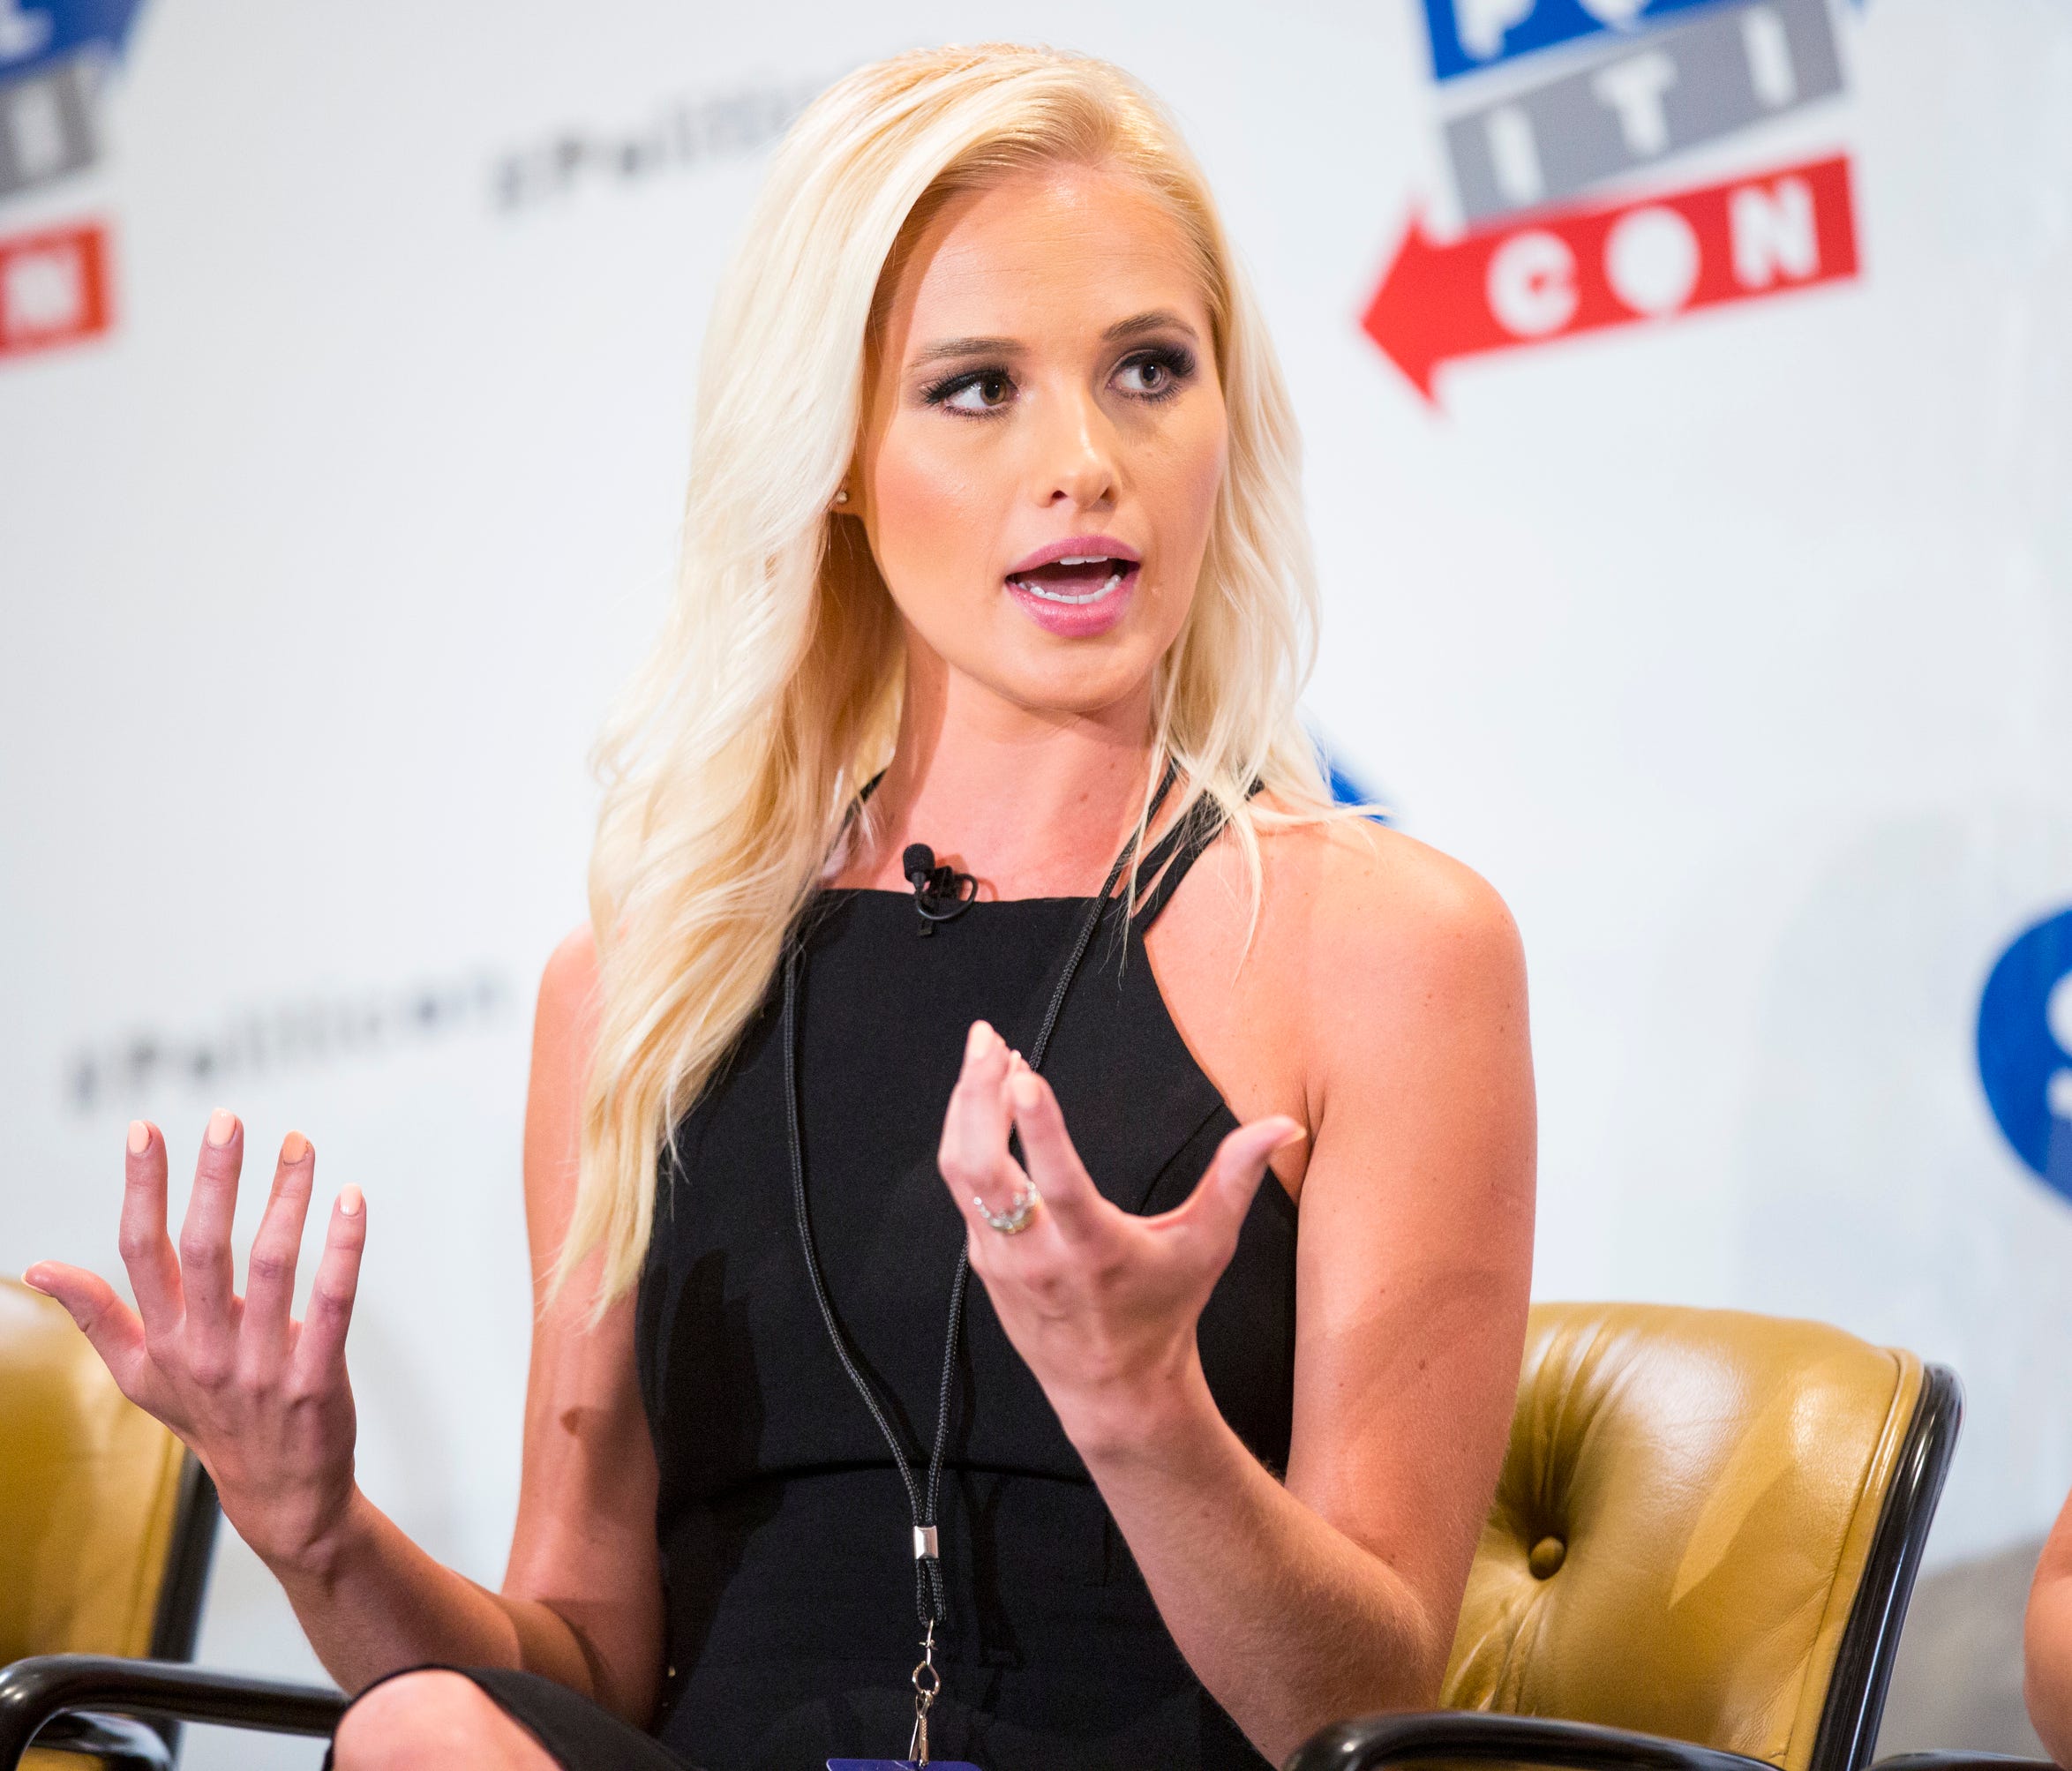 Tomi Lahren seen at Politicon 2016 at The Pasadena Convention Center on Saturday, June 25, 2016, in Pasadena, CA. (Photo: Colin Young-Wolff, Invision/AP)